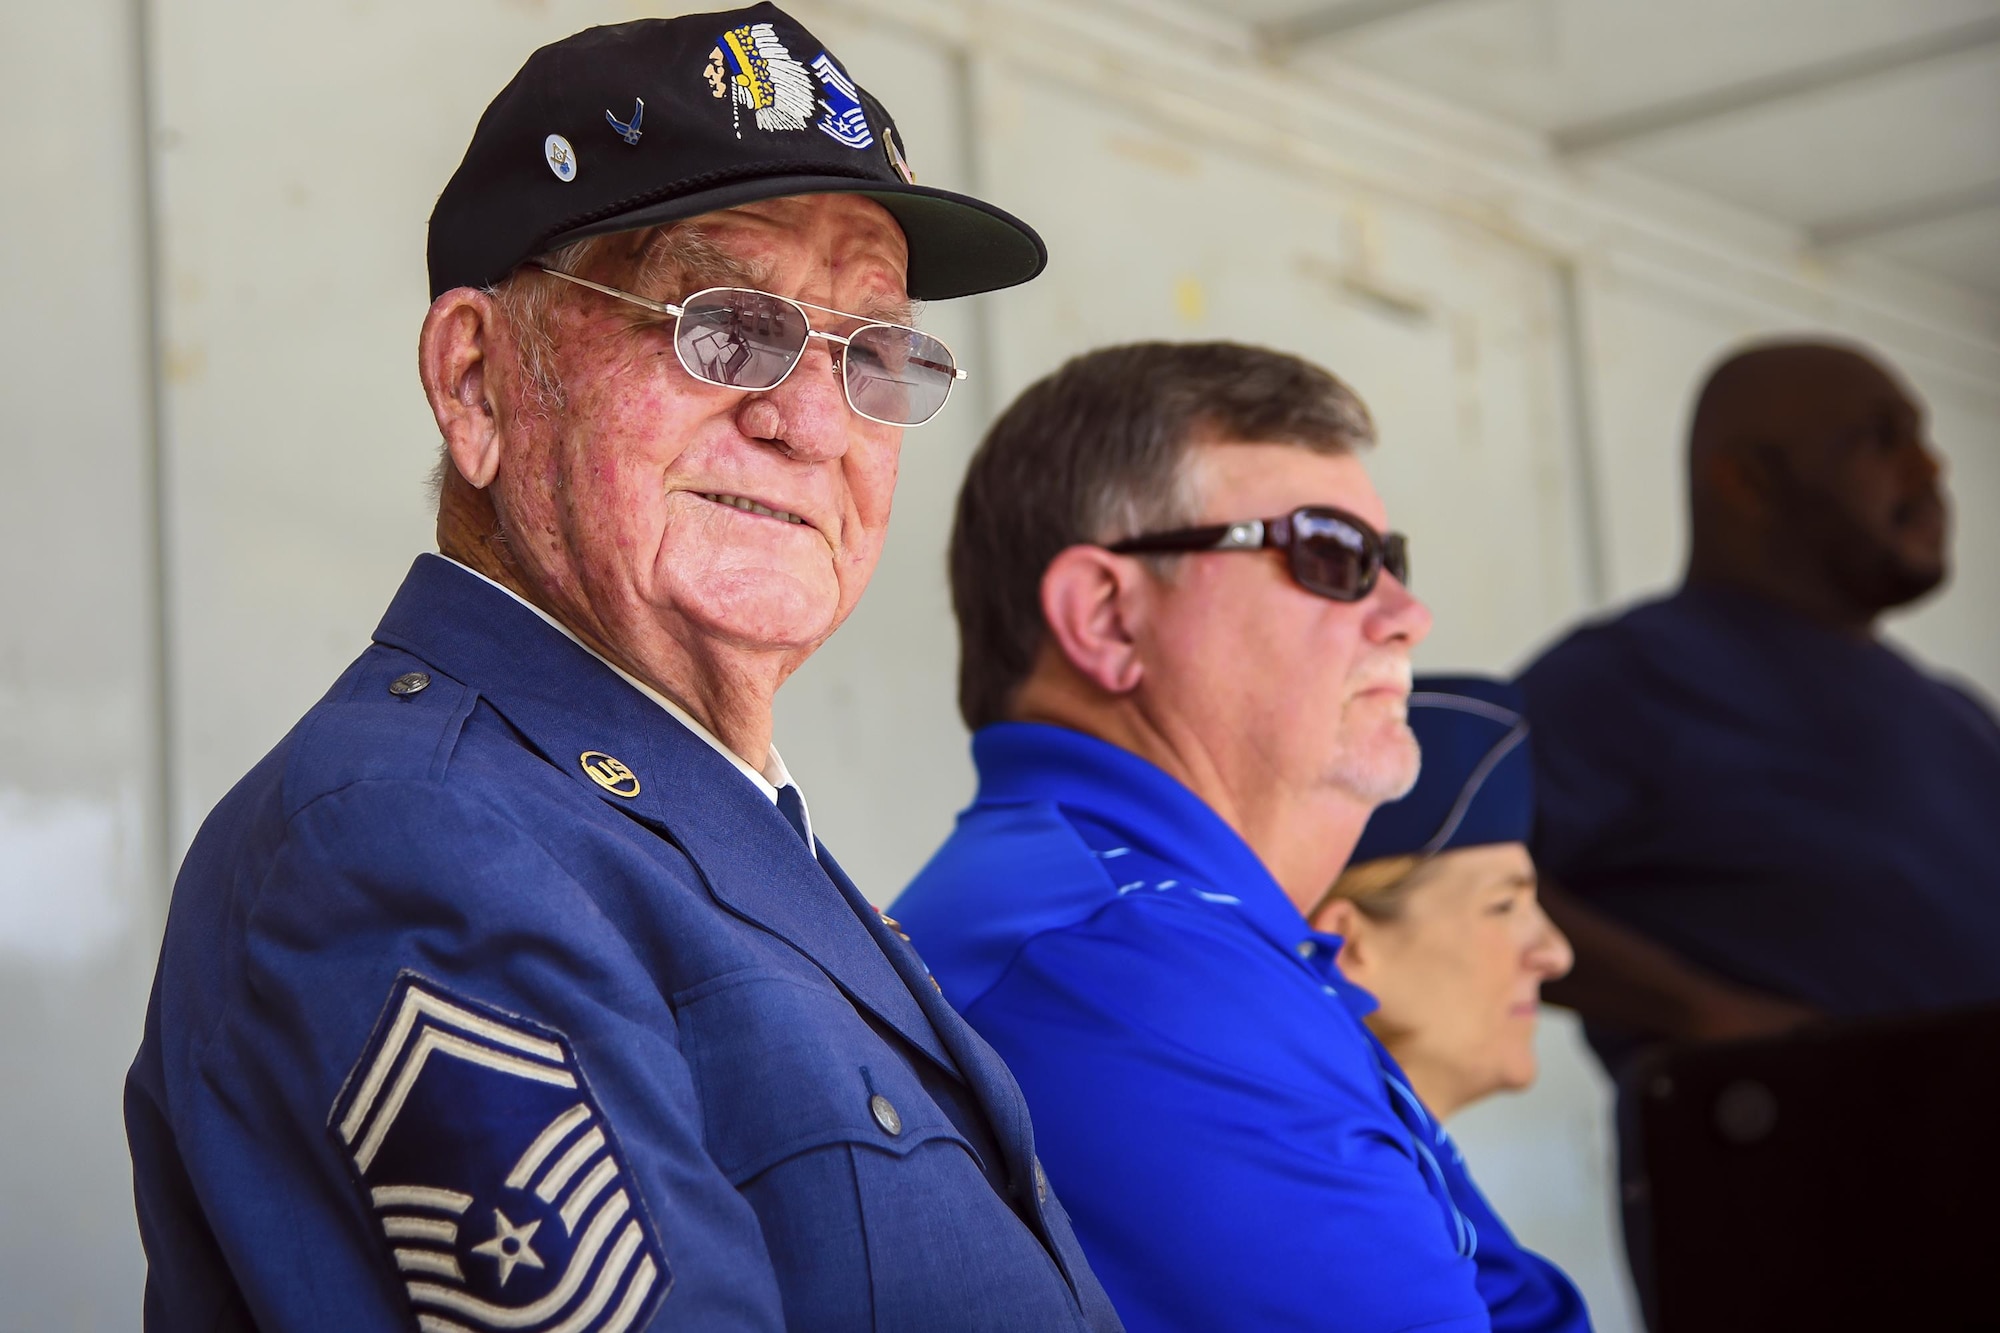 Retired Chief Master Sgt. Jim E. Harring poses for a picture during the U.S. Air Force 70th birthday celebration, Sept. 16, 2017, in Valdosta, Ga. Harring enlisted in the Army Air Corps on Jan. 8, 1947 and was a charter member of the Air Force when it was first established in September of that year. Harring served over 30 years in the military. (U.S. Air Force photo by Airman Eugene Oliver)